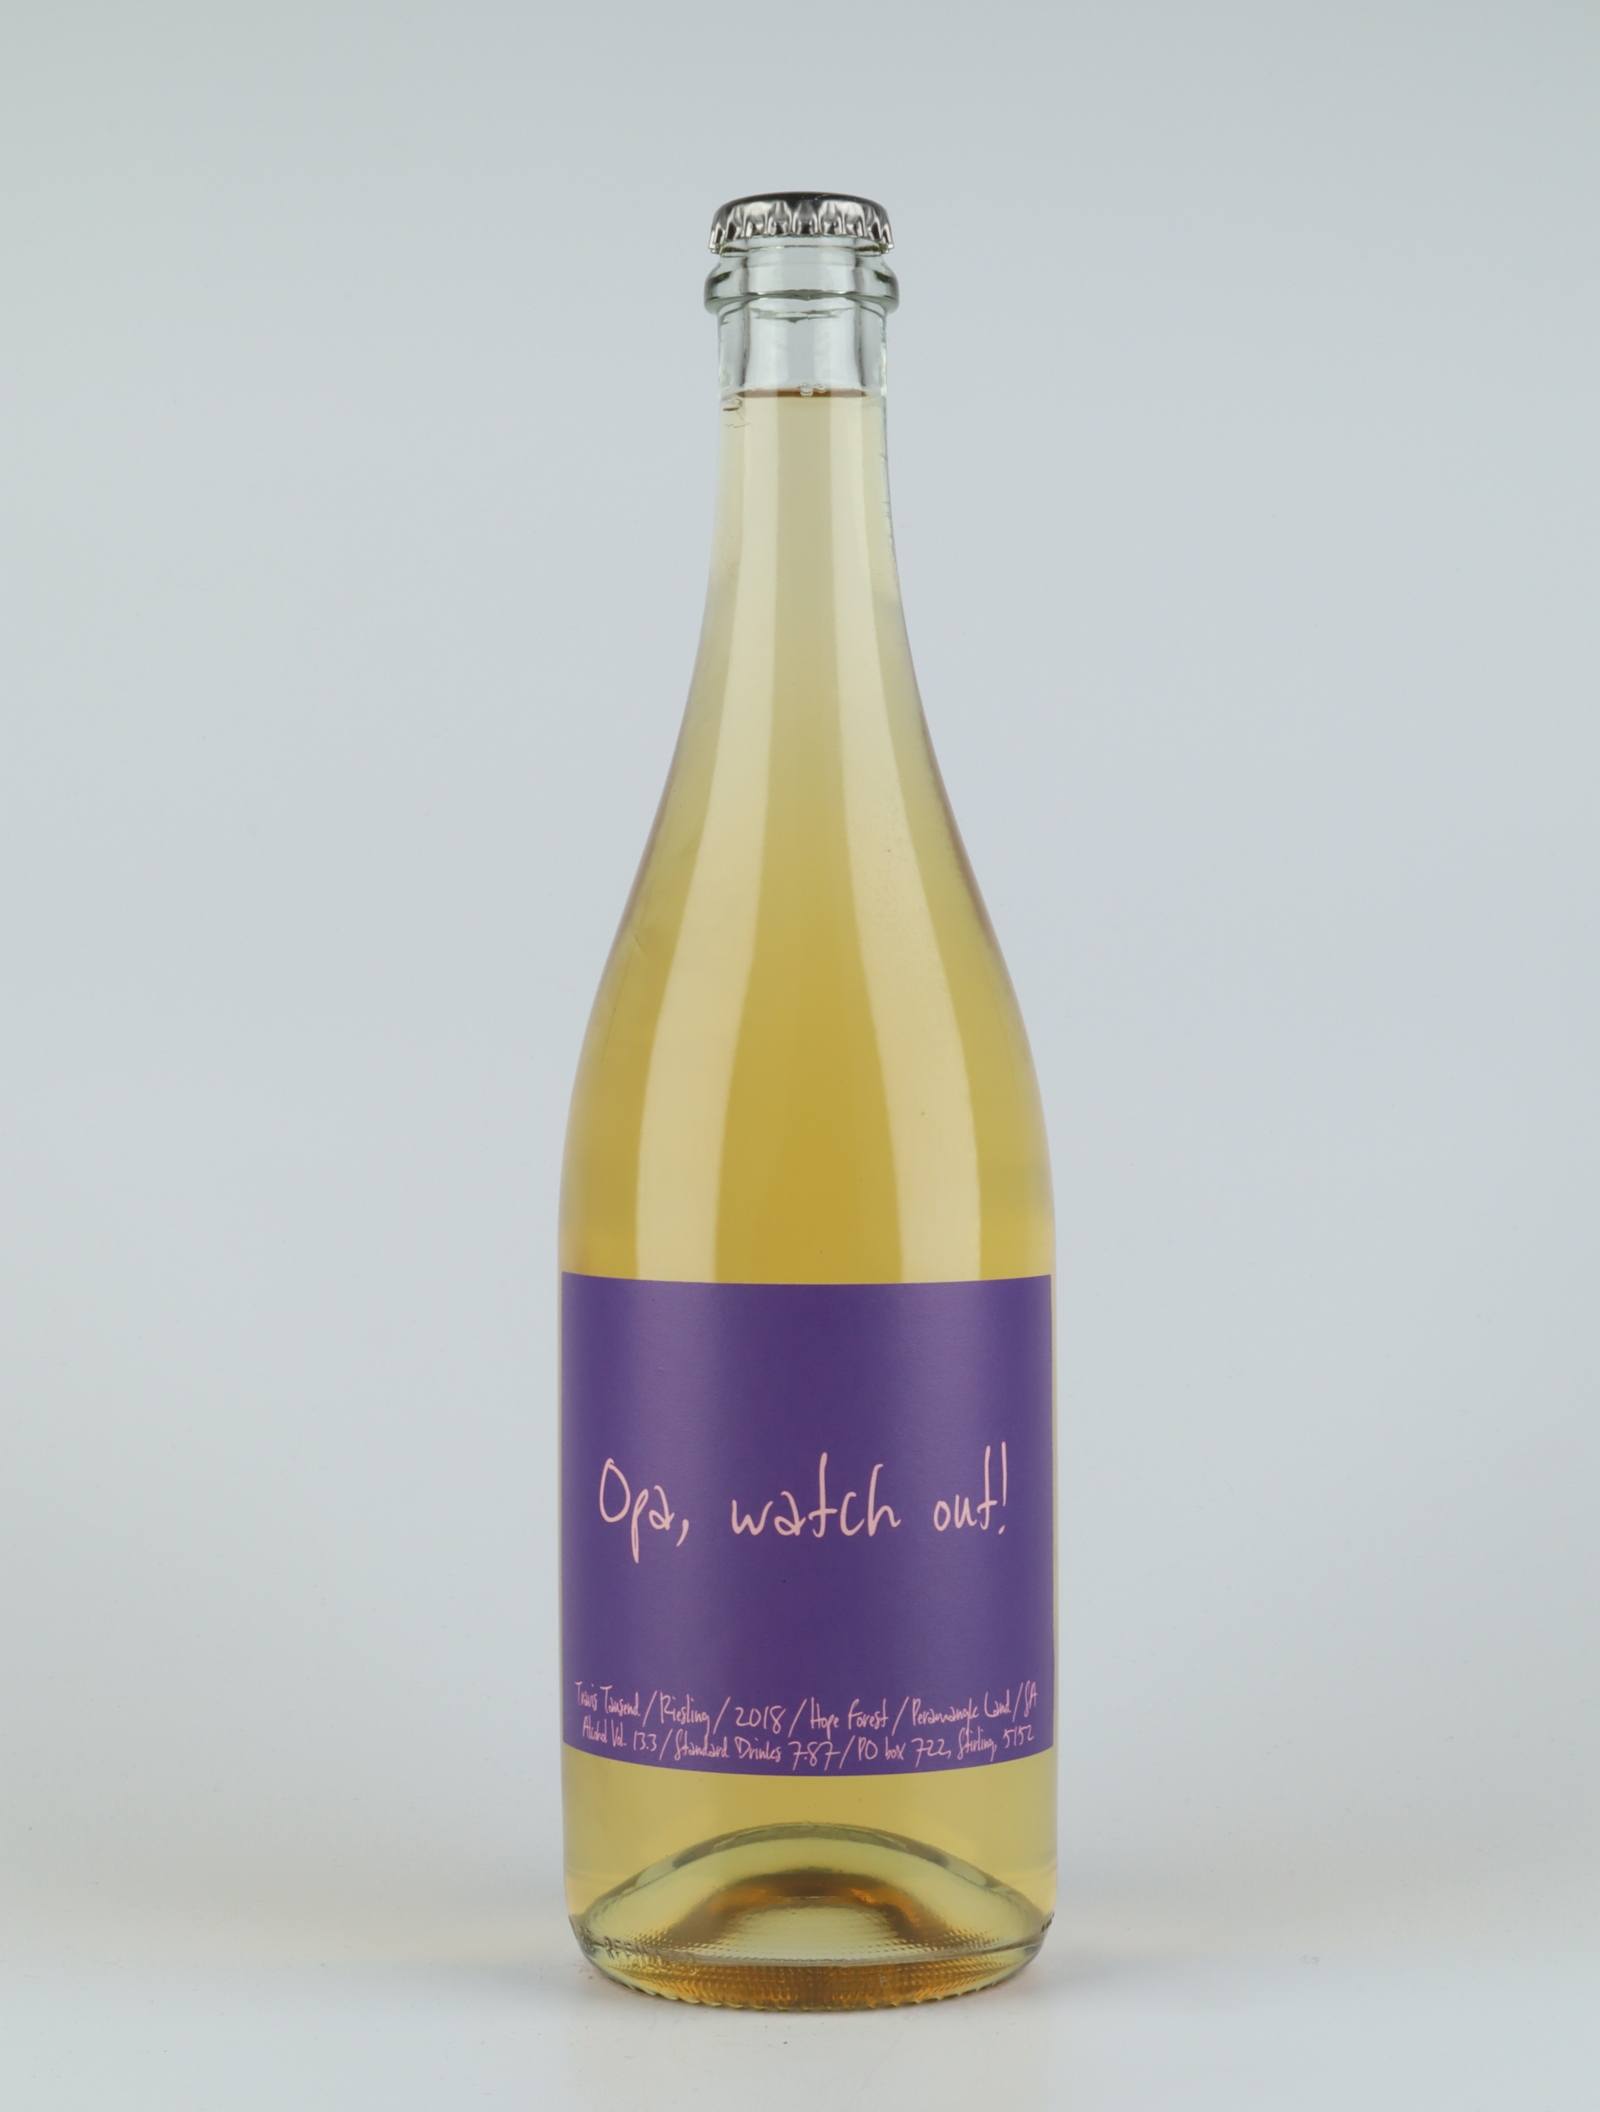 A bottle 2019 Opa Watch Out White wine from Travis Tausend, Adelaide Hills in Australia